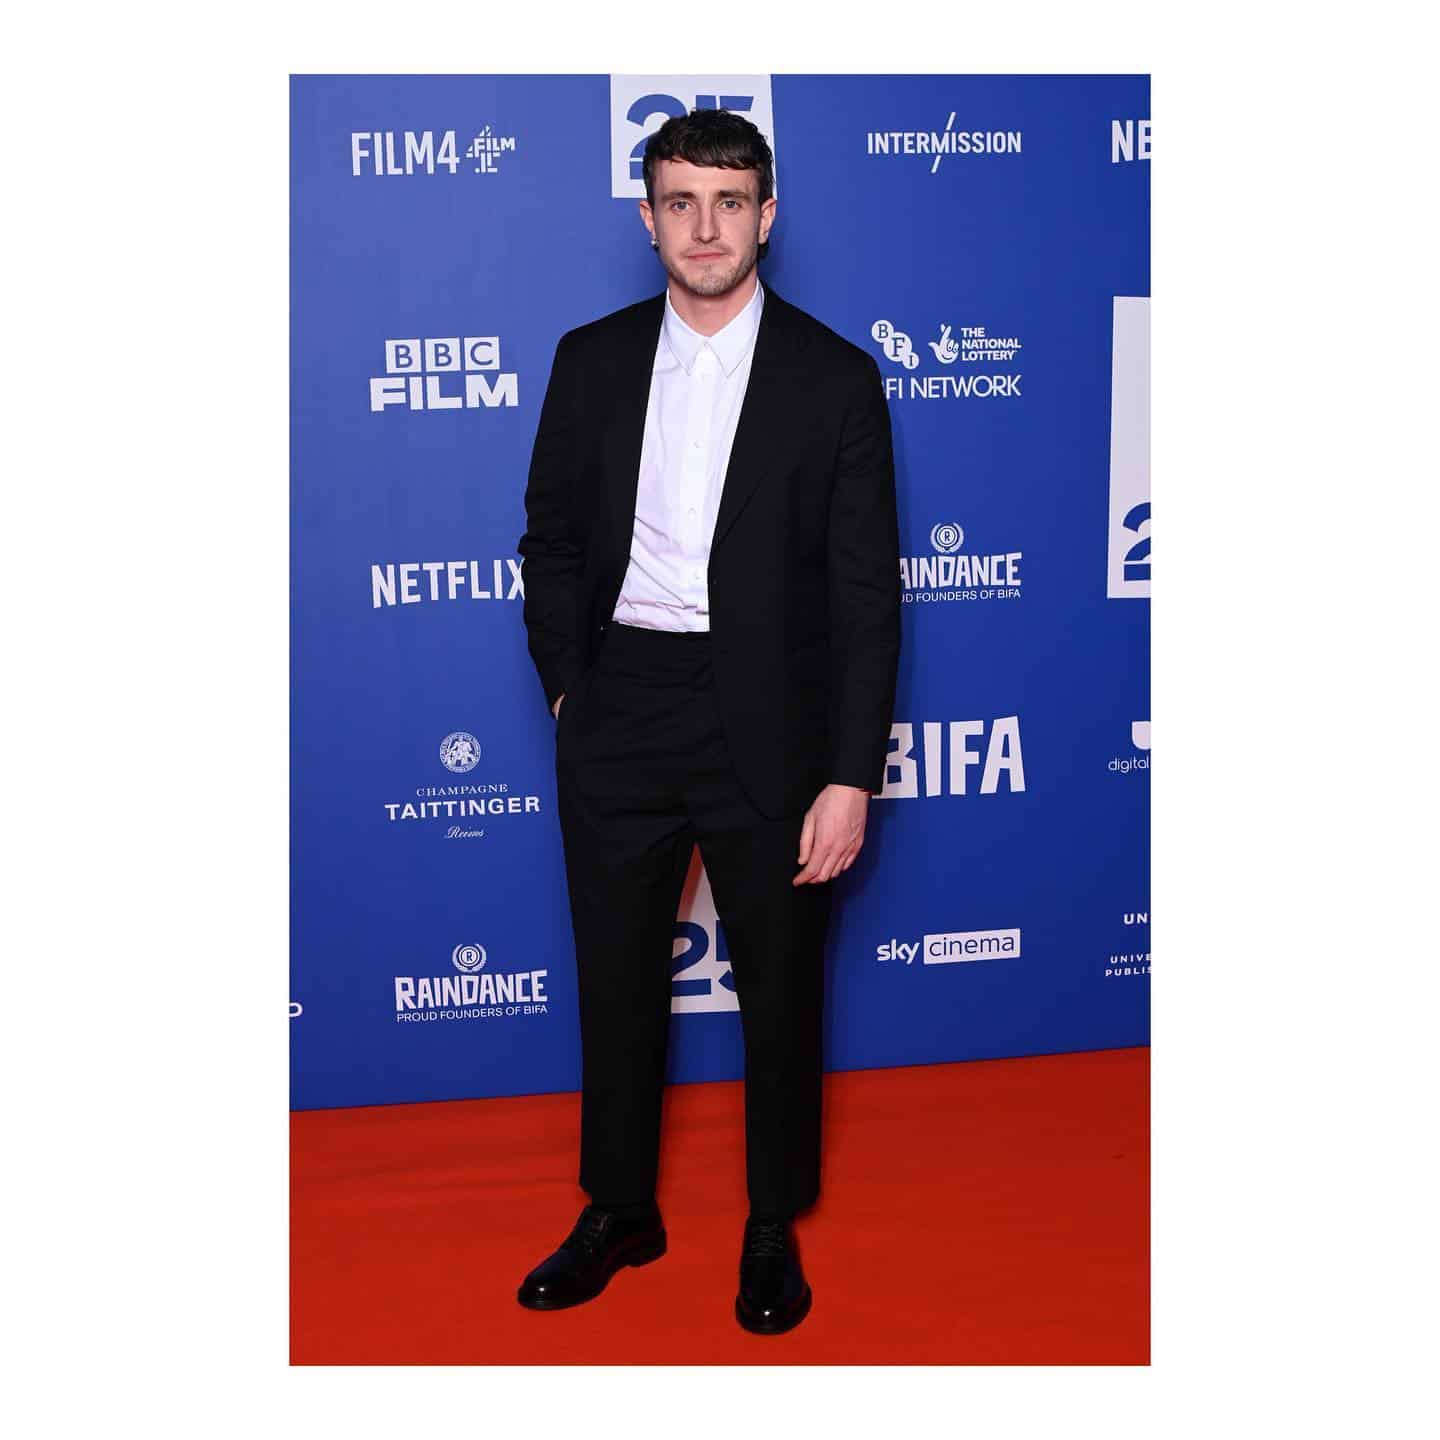 at the @bifa_film awards, which saw Aftersun receive the Best  British Independent Film and a further 6 awards 
.
.
 @knightjosh 
 @felicitykay @simonerocha_ @cartier 
.
.